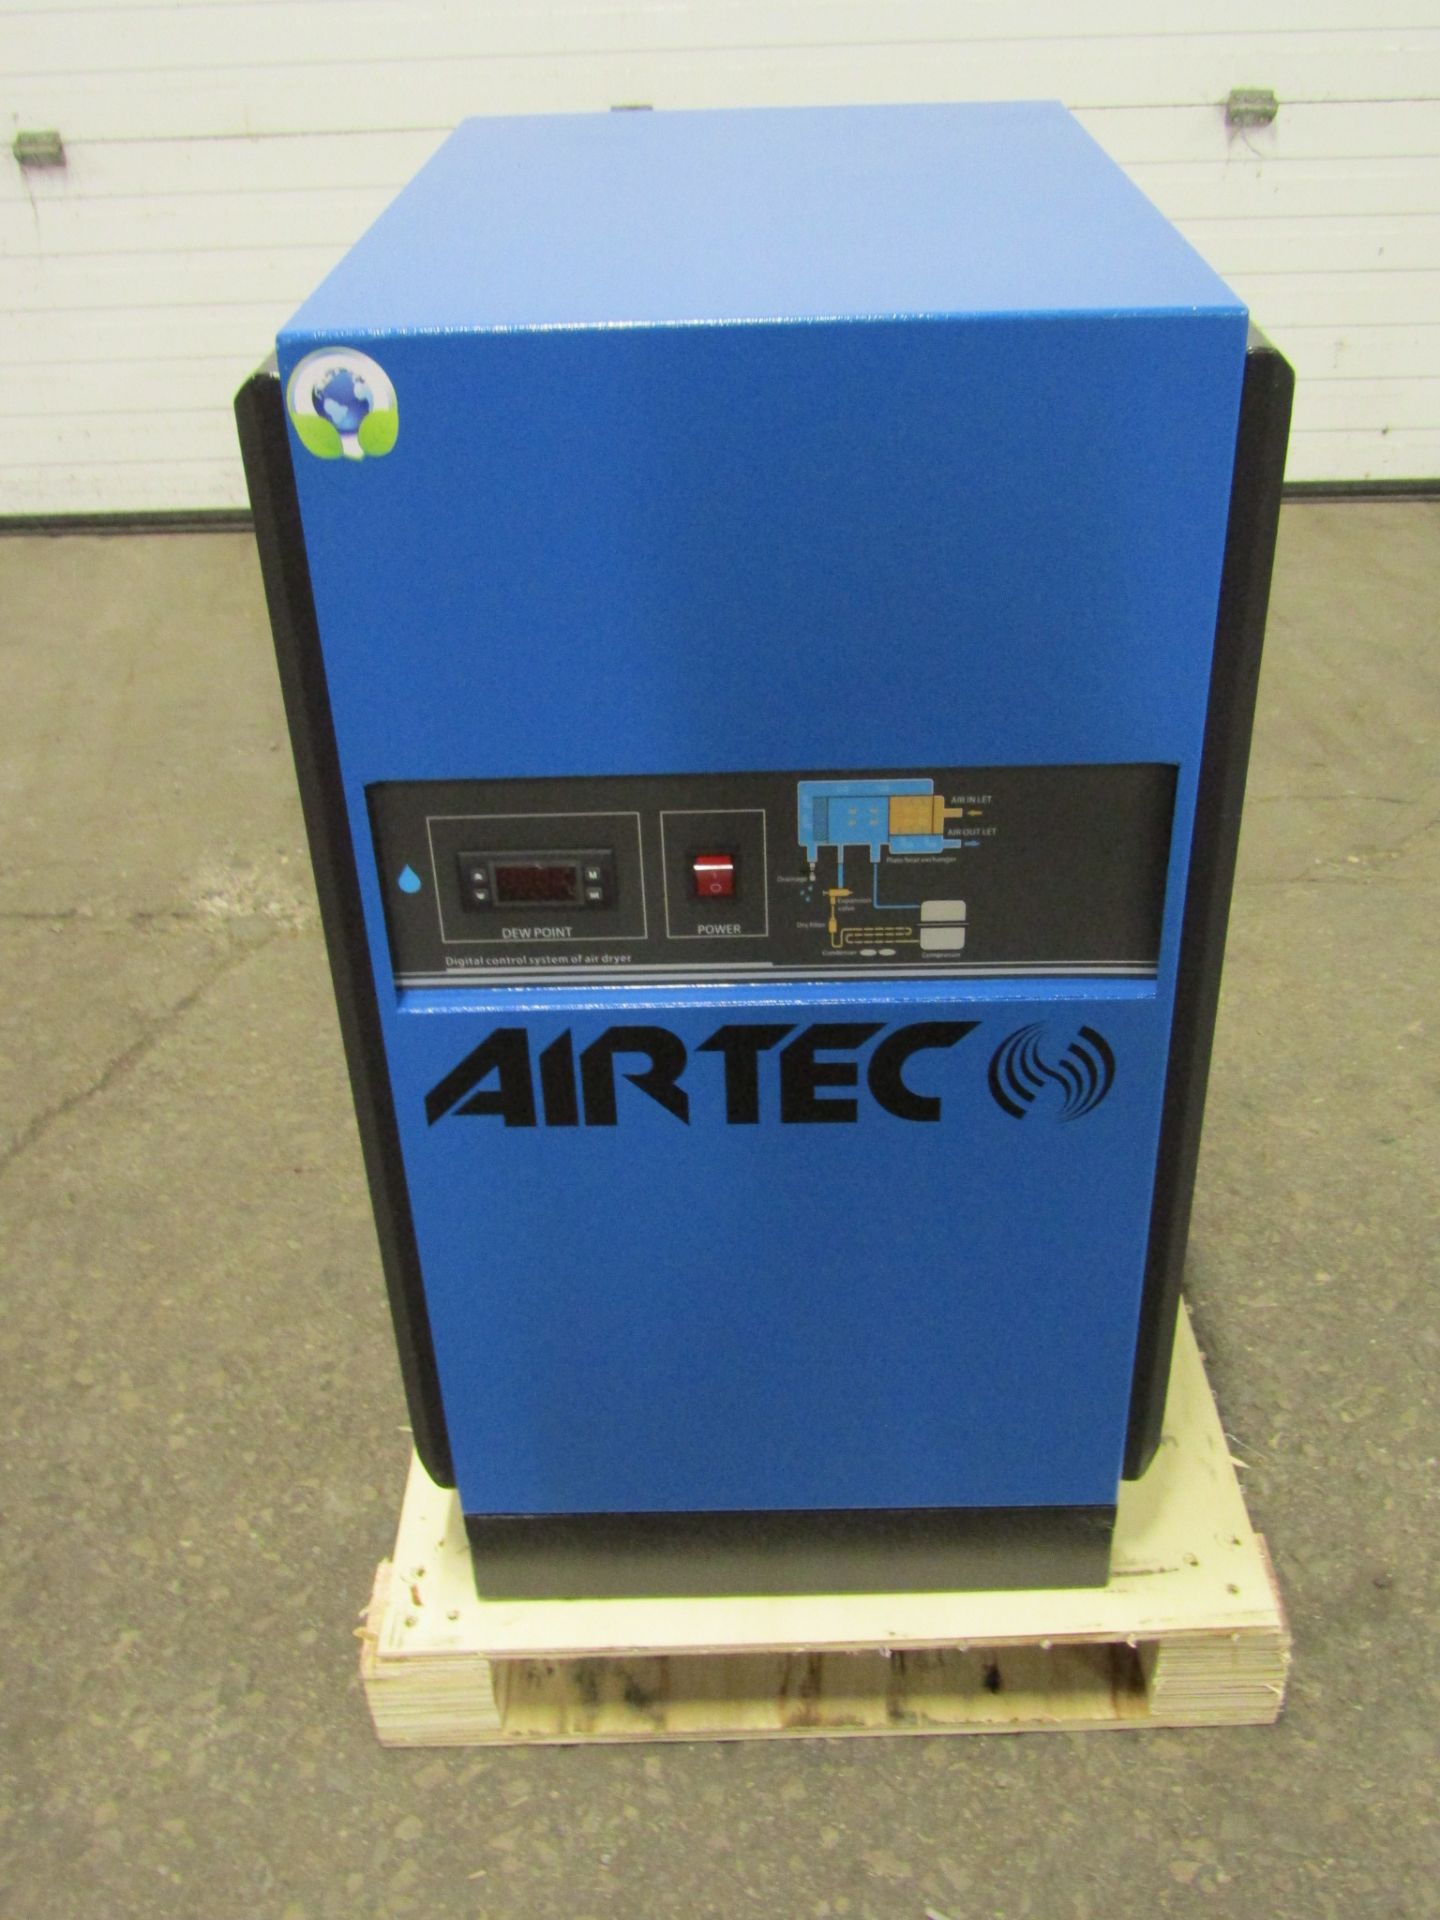 MINT Airtec Compressed Air Dryer 120CFM Unused new units 110V 1 phase